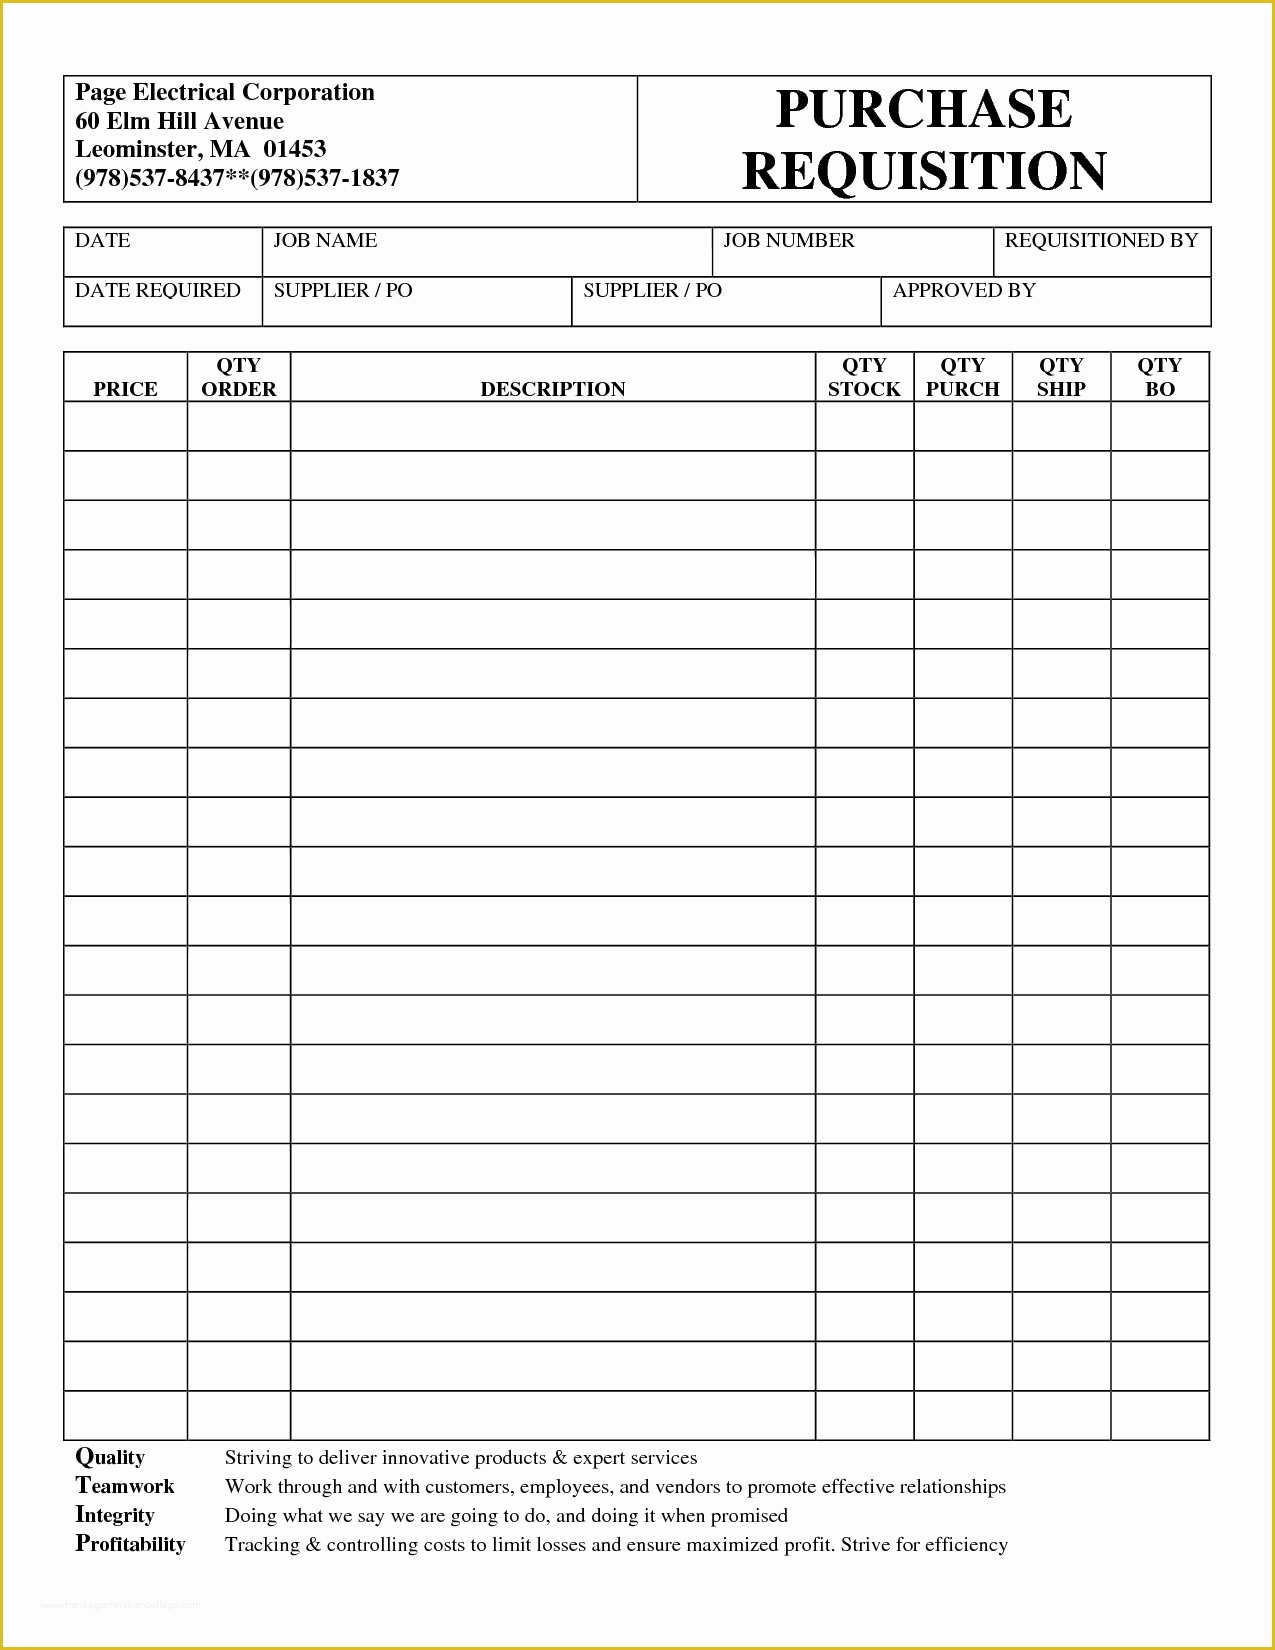 Free Requisition form Template Excel Of Best S Of Purchase Requisition form Purchase